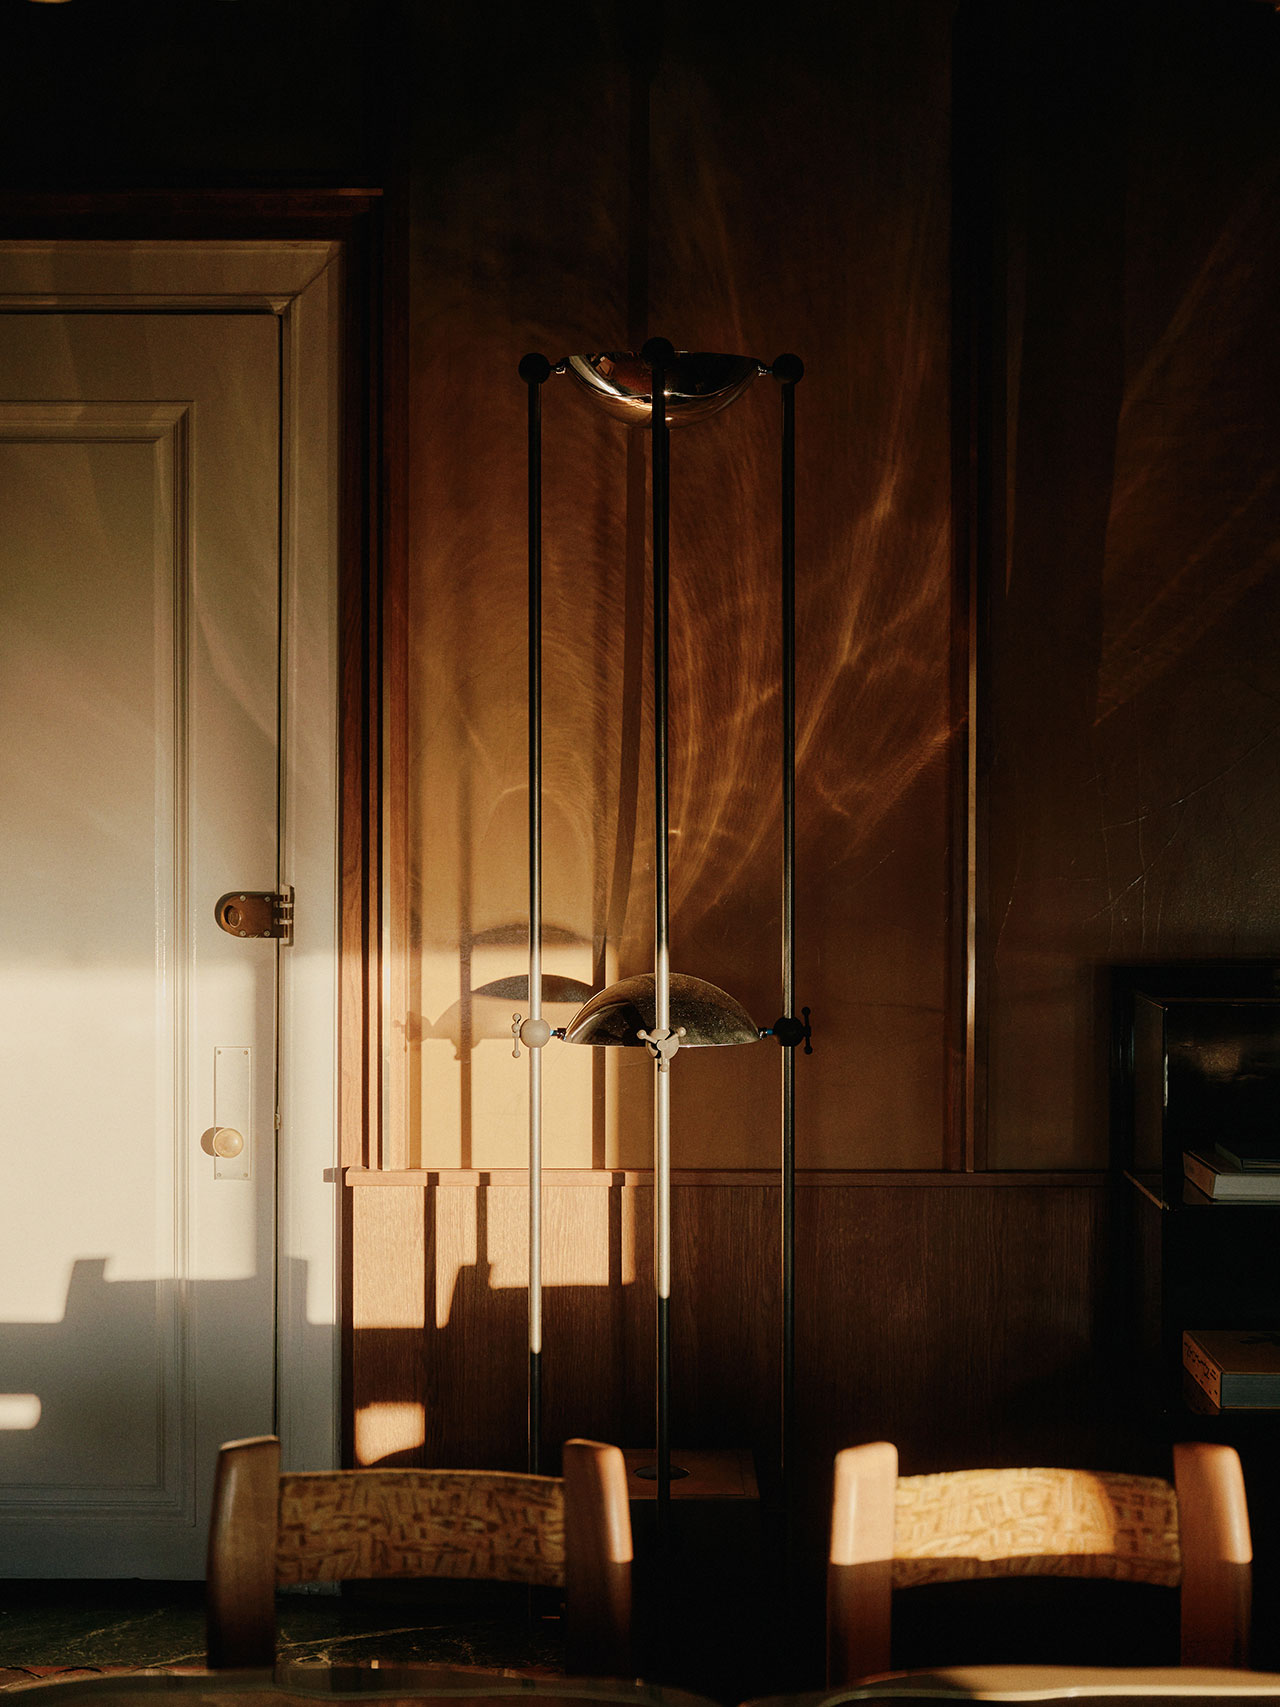 Metalic floor lamp by Ronald Cecil Sportes (1983).
Photography by William Jess Laird.